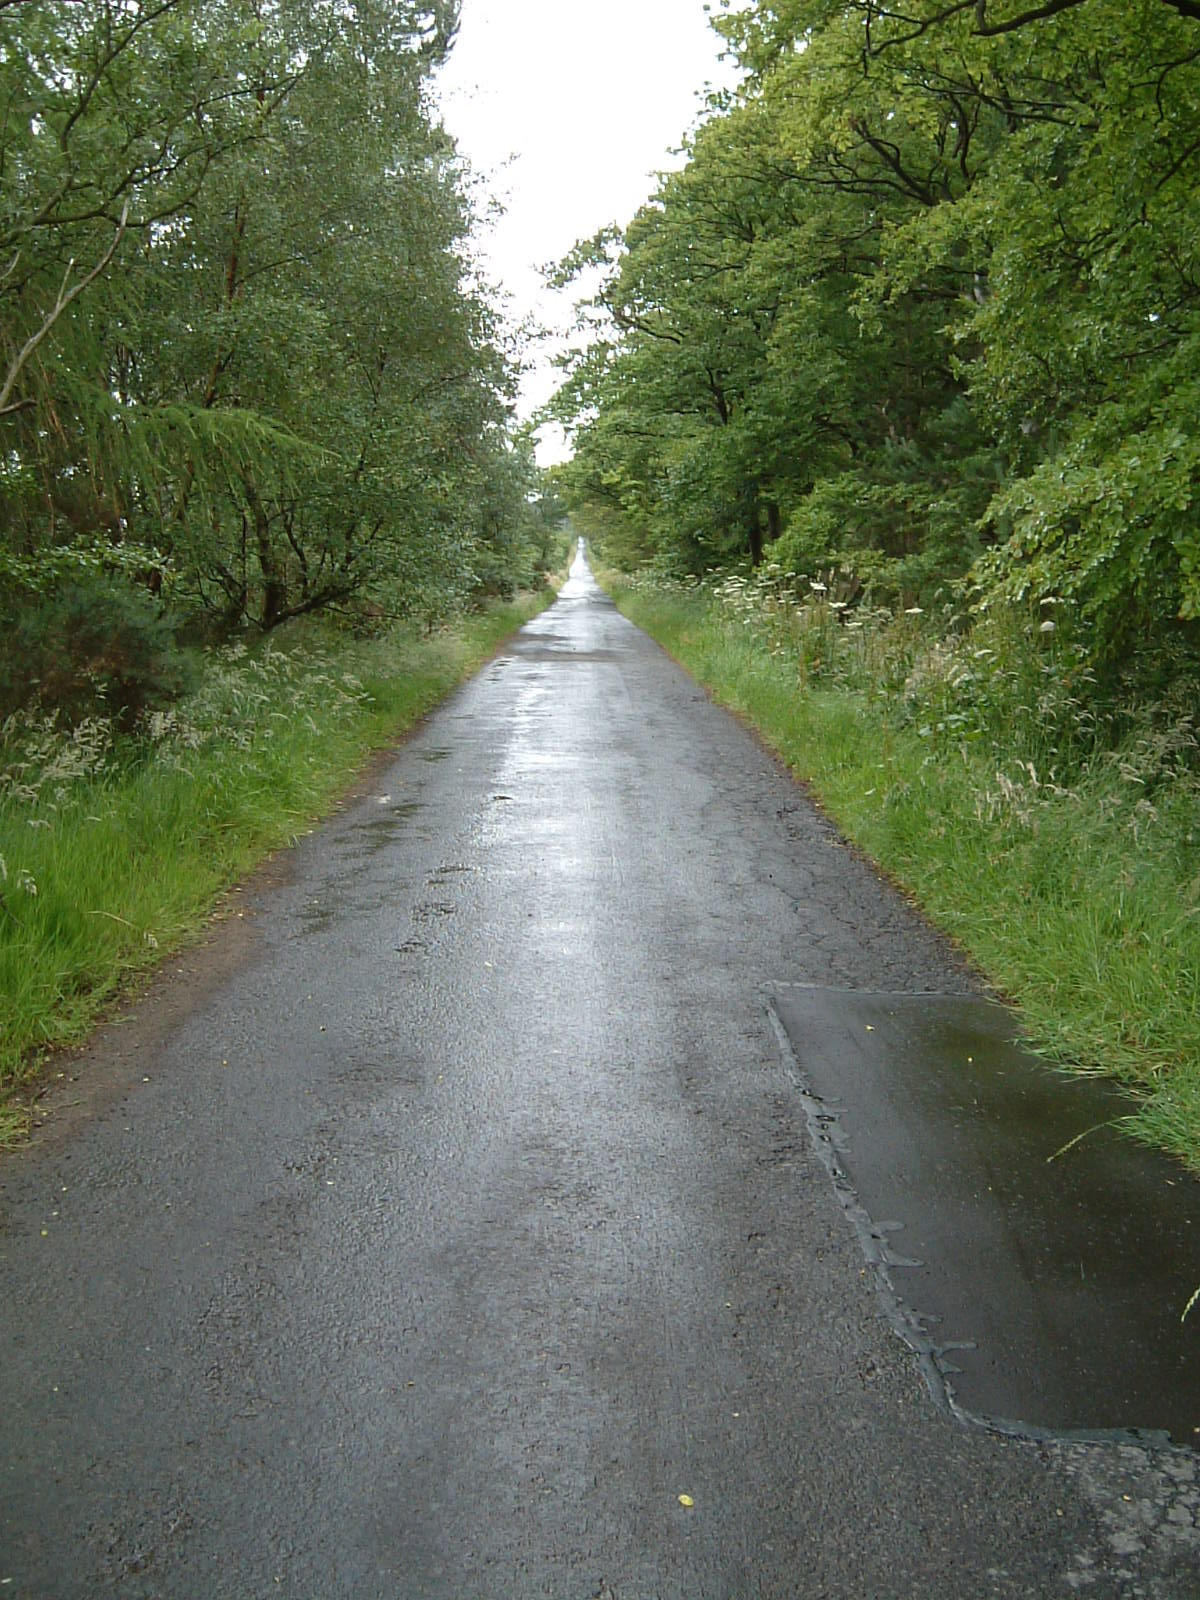 The long, wet road to Balerno